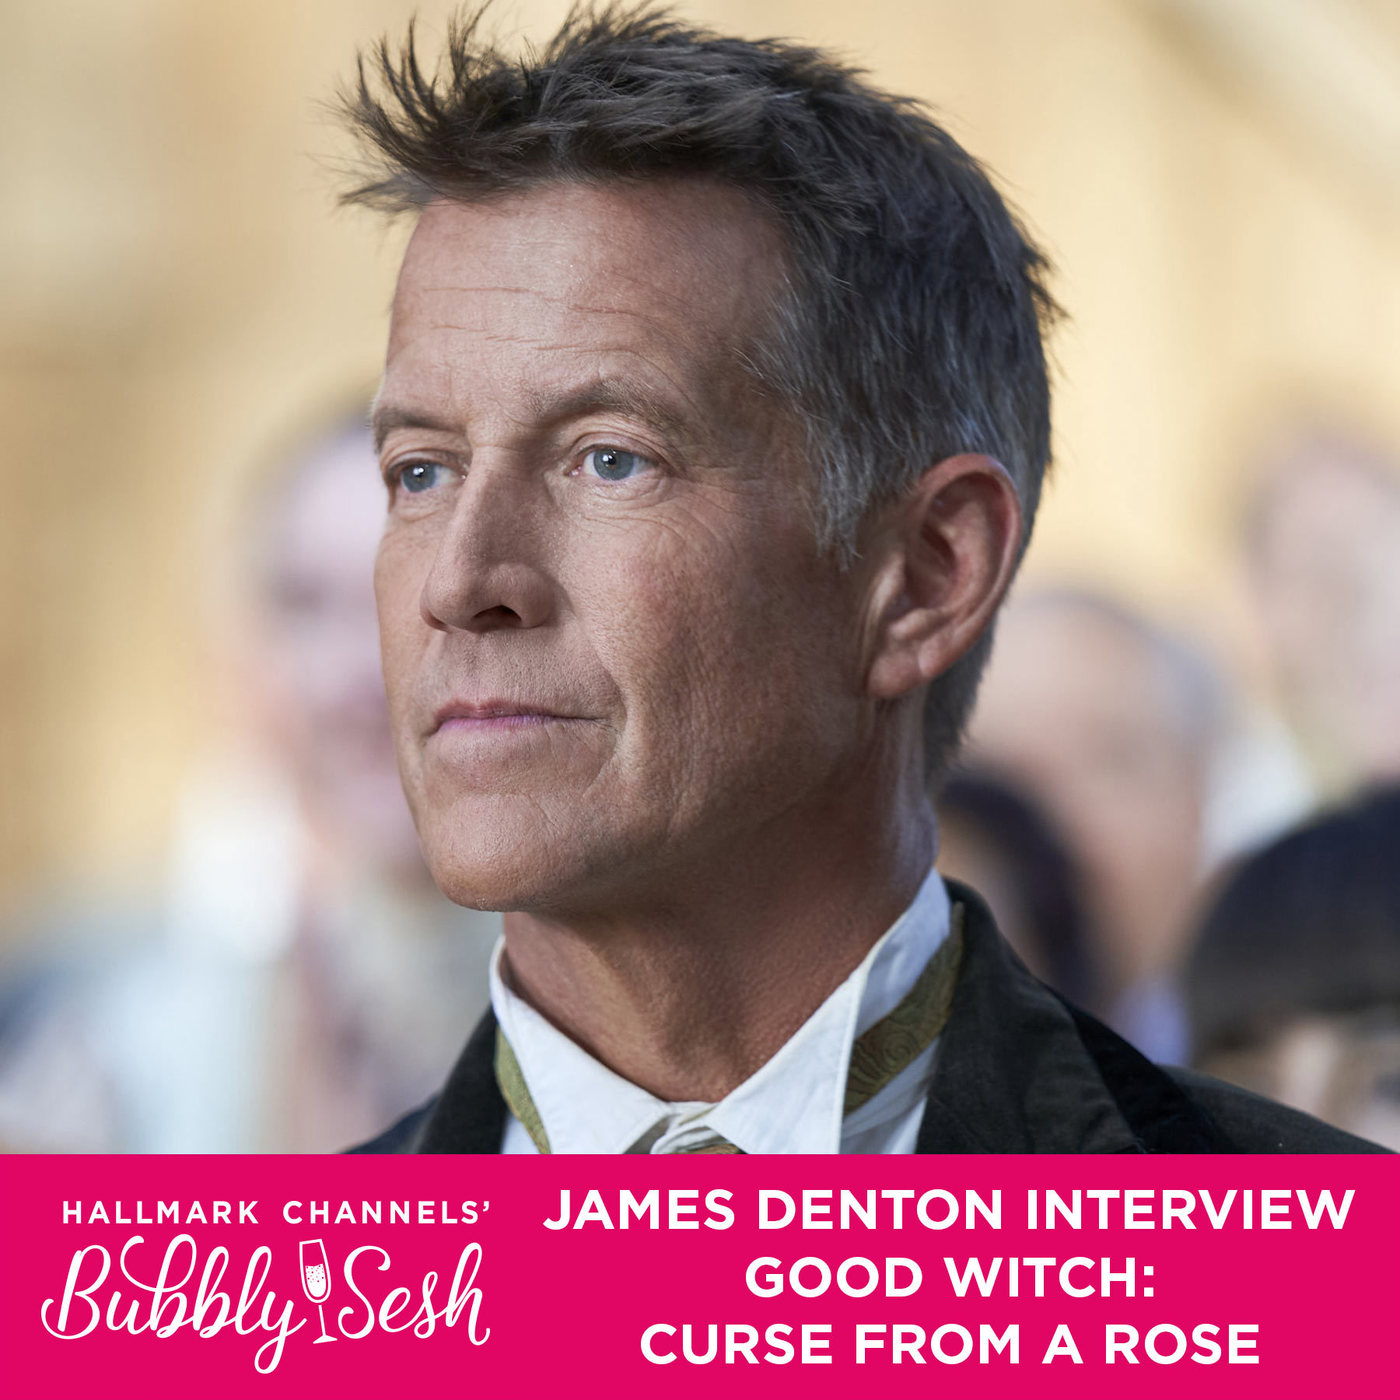 James Denton Interview: Good Witch: Curse from a Rose  